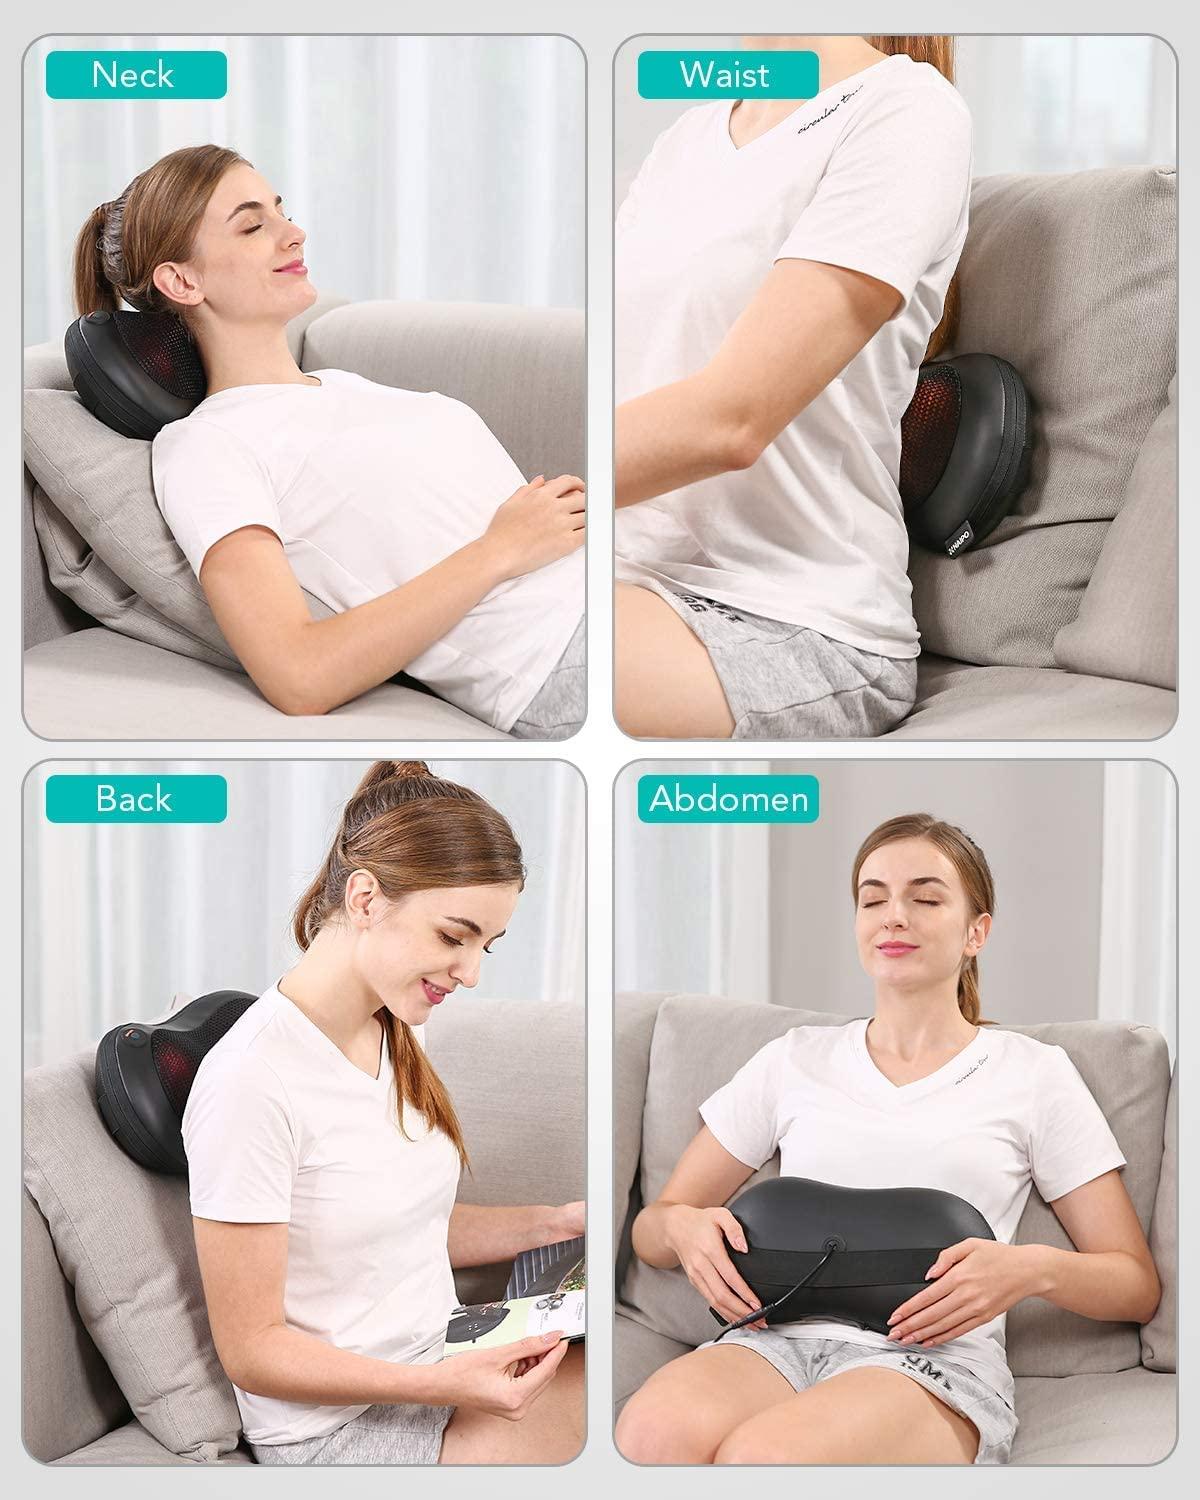  Back Massager with Heat, Shiatsu Neck and Back Massager for  Pain Relief, Deep Tissue 3D Kneading Massage Pillow for Lower Back,  Shoulder, Legs, Full Body Relaxation, 3 Speeds, Gifts for Mom